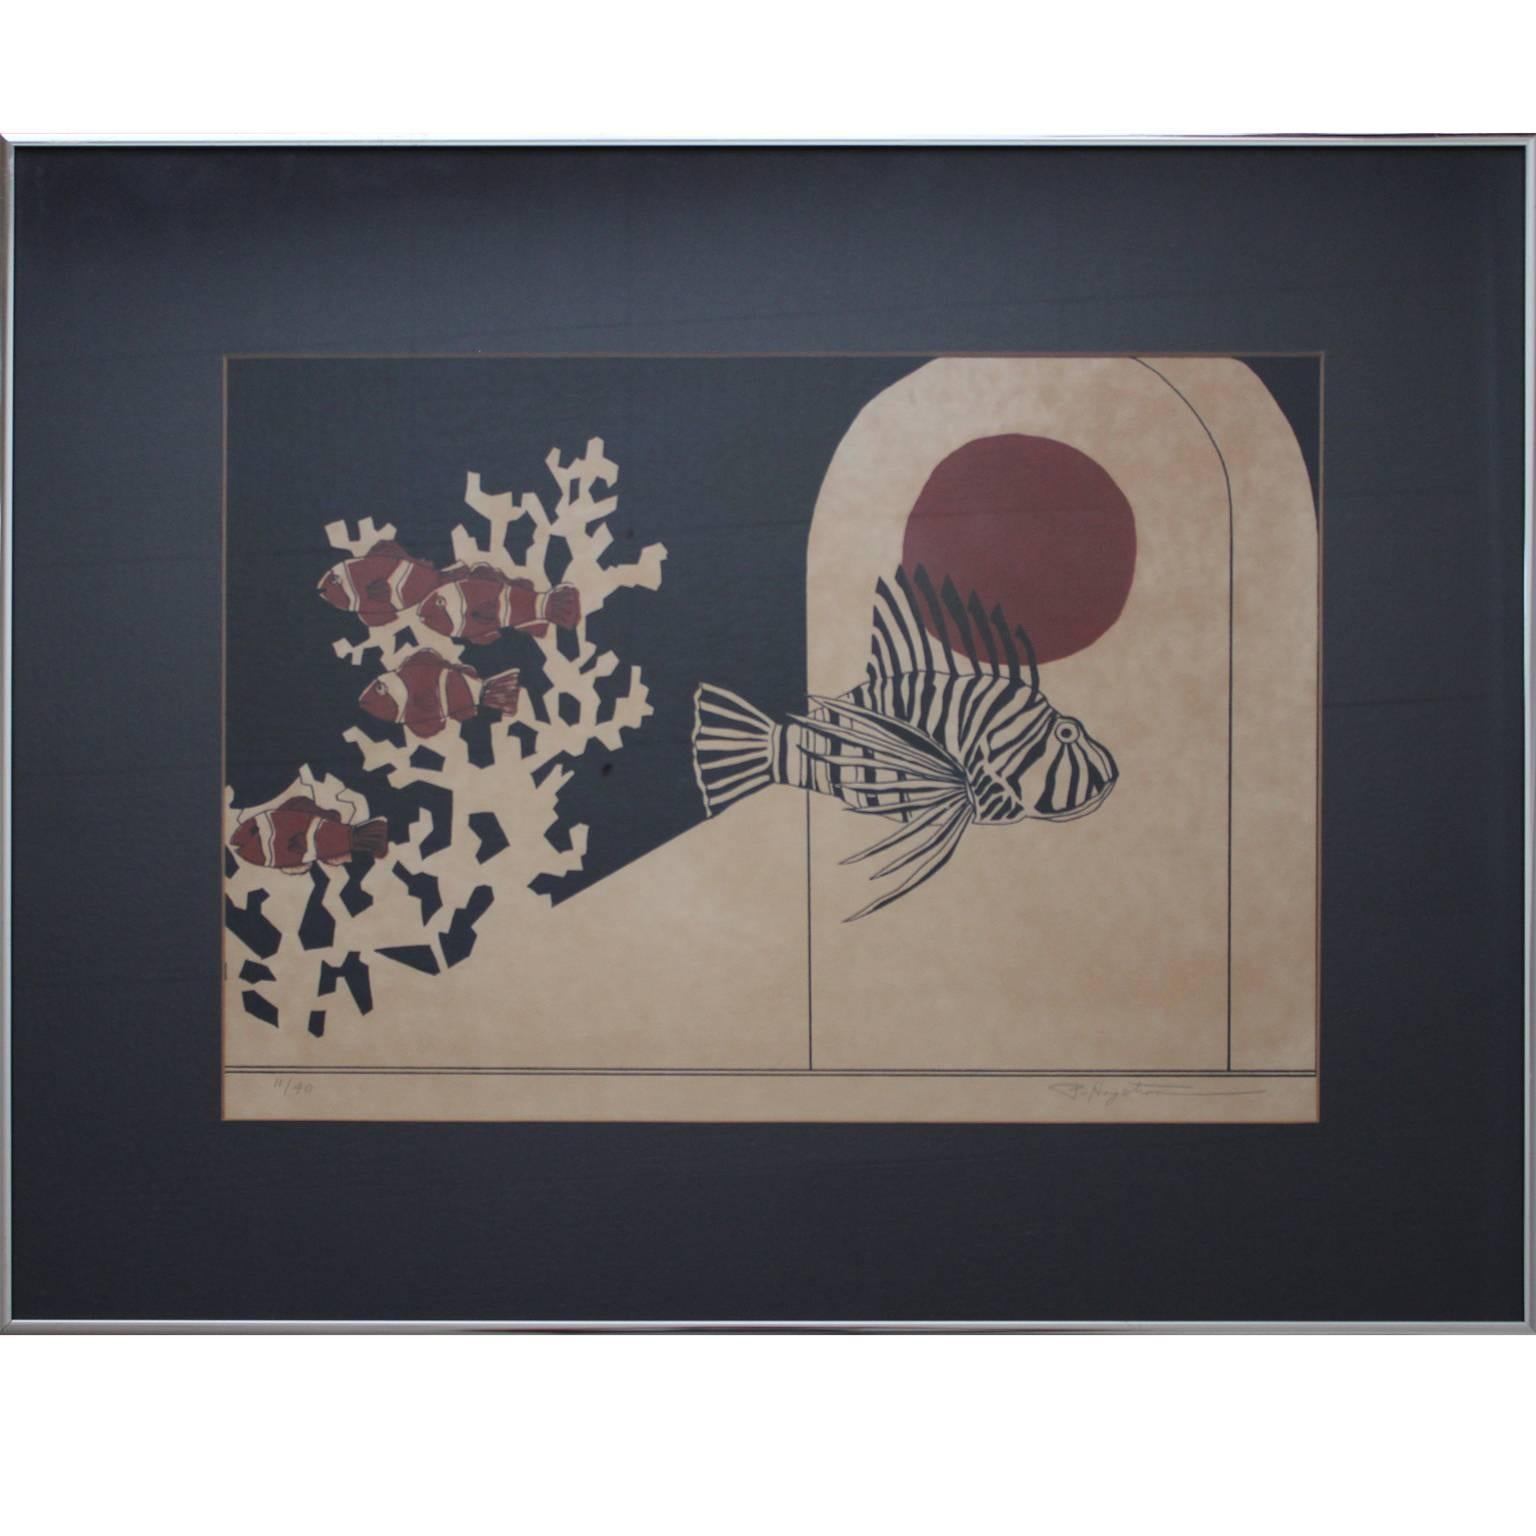 Patricia Hagstrom Abstract Print - Black, Red, and White Aquatic Print of a School of Clown Fish and a Lion Fish